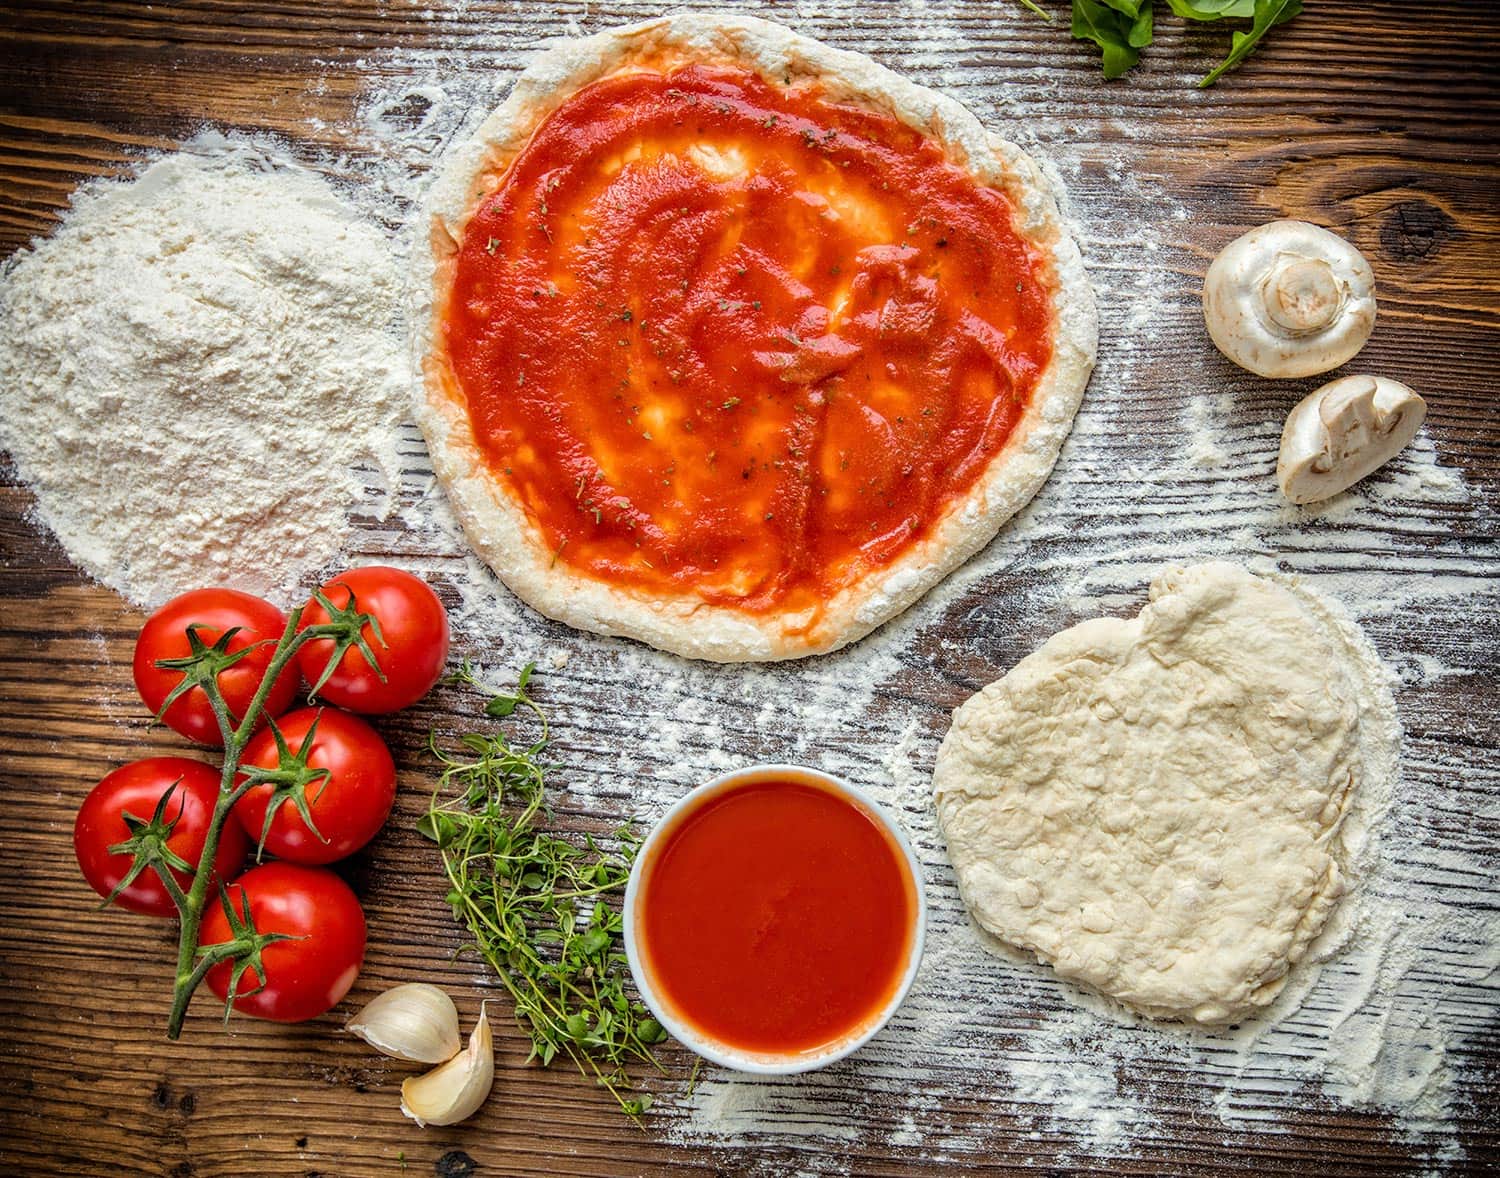 Pizza dough with ingredients and tomato sauce served on rustic wooden table